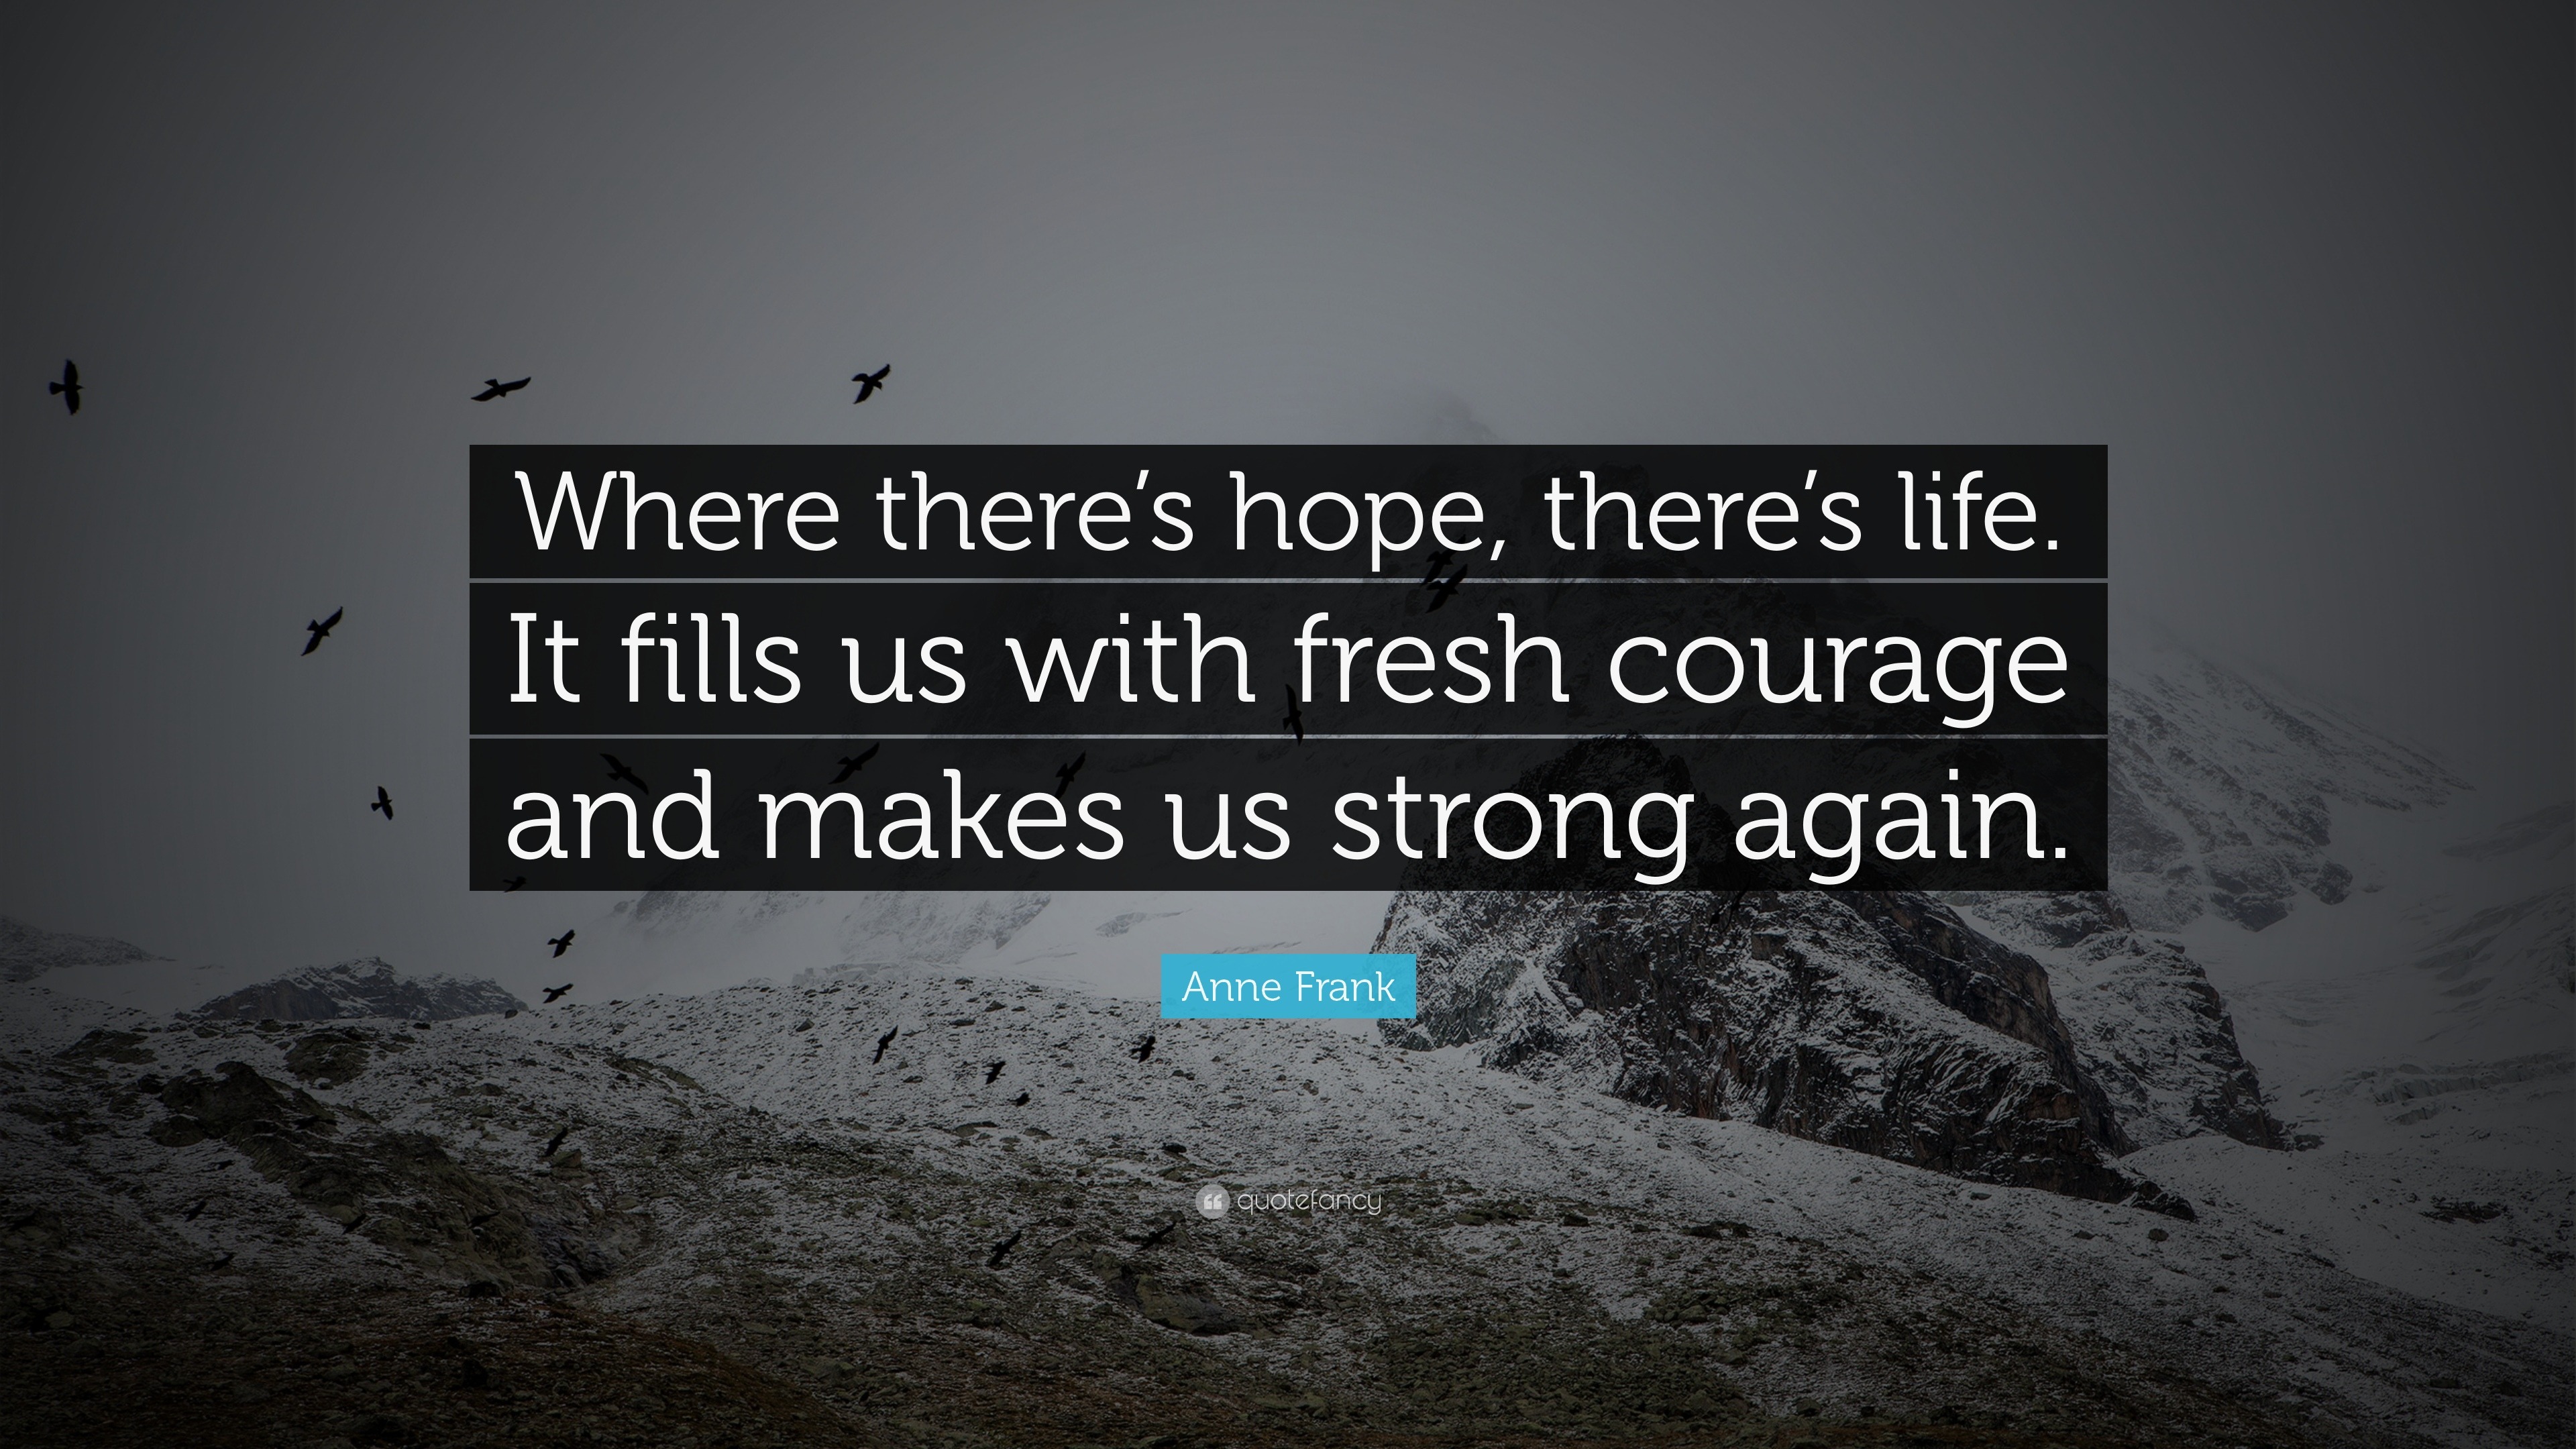 https://quotefancy.com/media/wallpaper/3840x2160/4589-Anne-Frank-Quote-Where-there-s-hope-there-s-life-It-fills-us-with.jpg